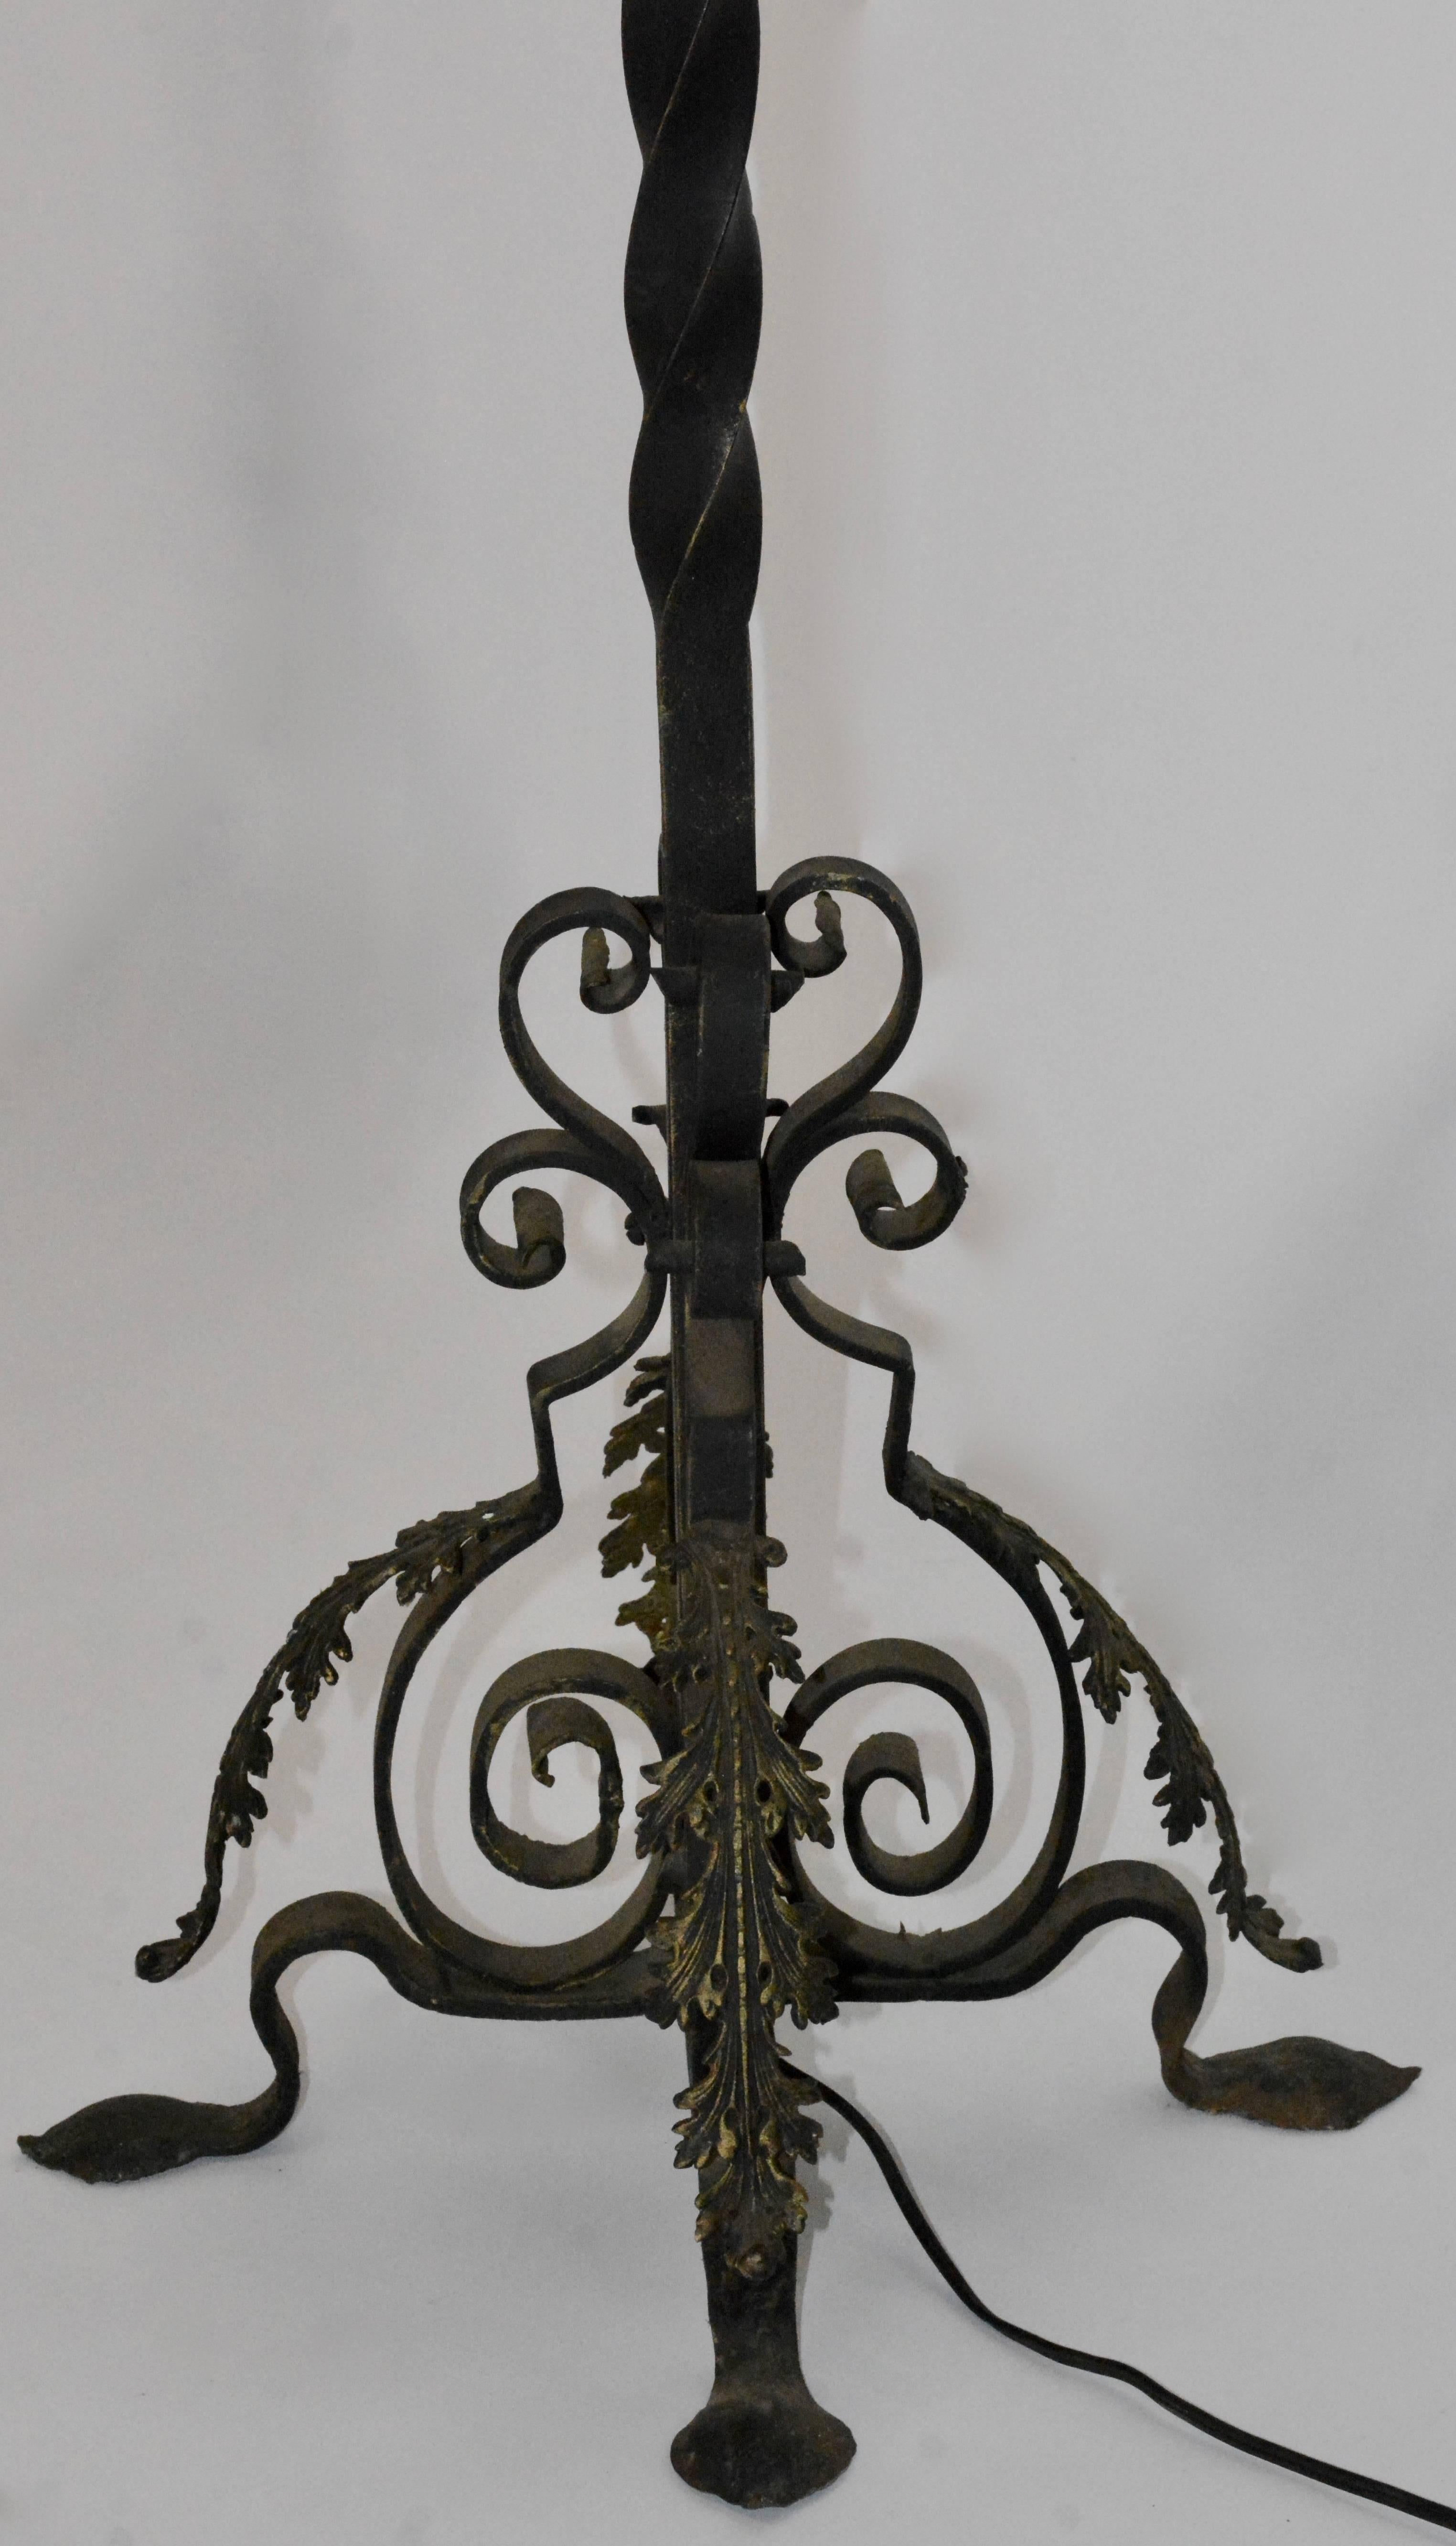 Spanish Colonial Spanish Revival Wrought Iron Floor Torchères, Pair